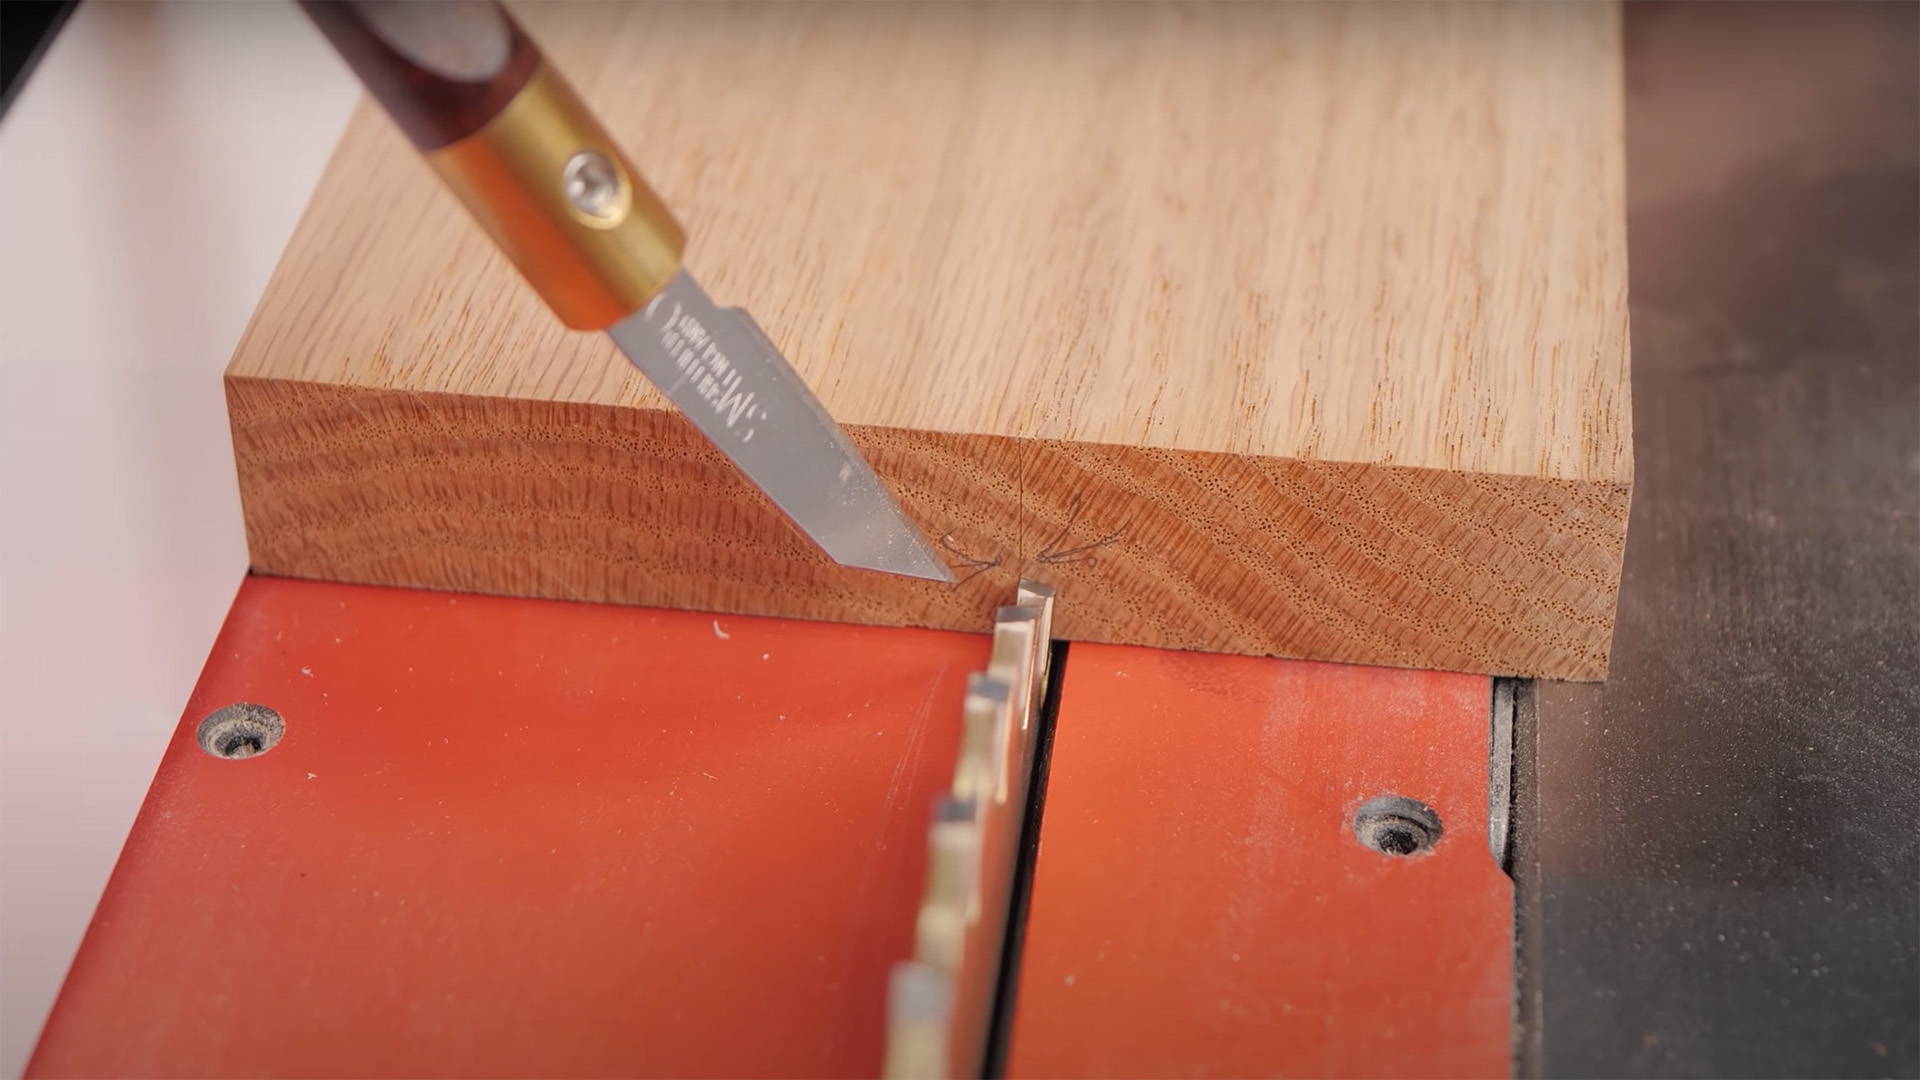 marking knife pointing at a board lined up on a table saw to cut